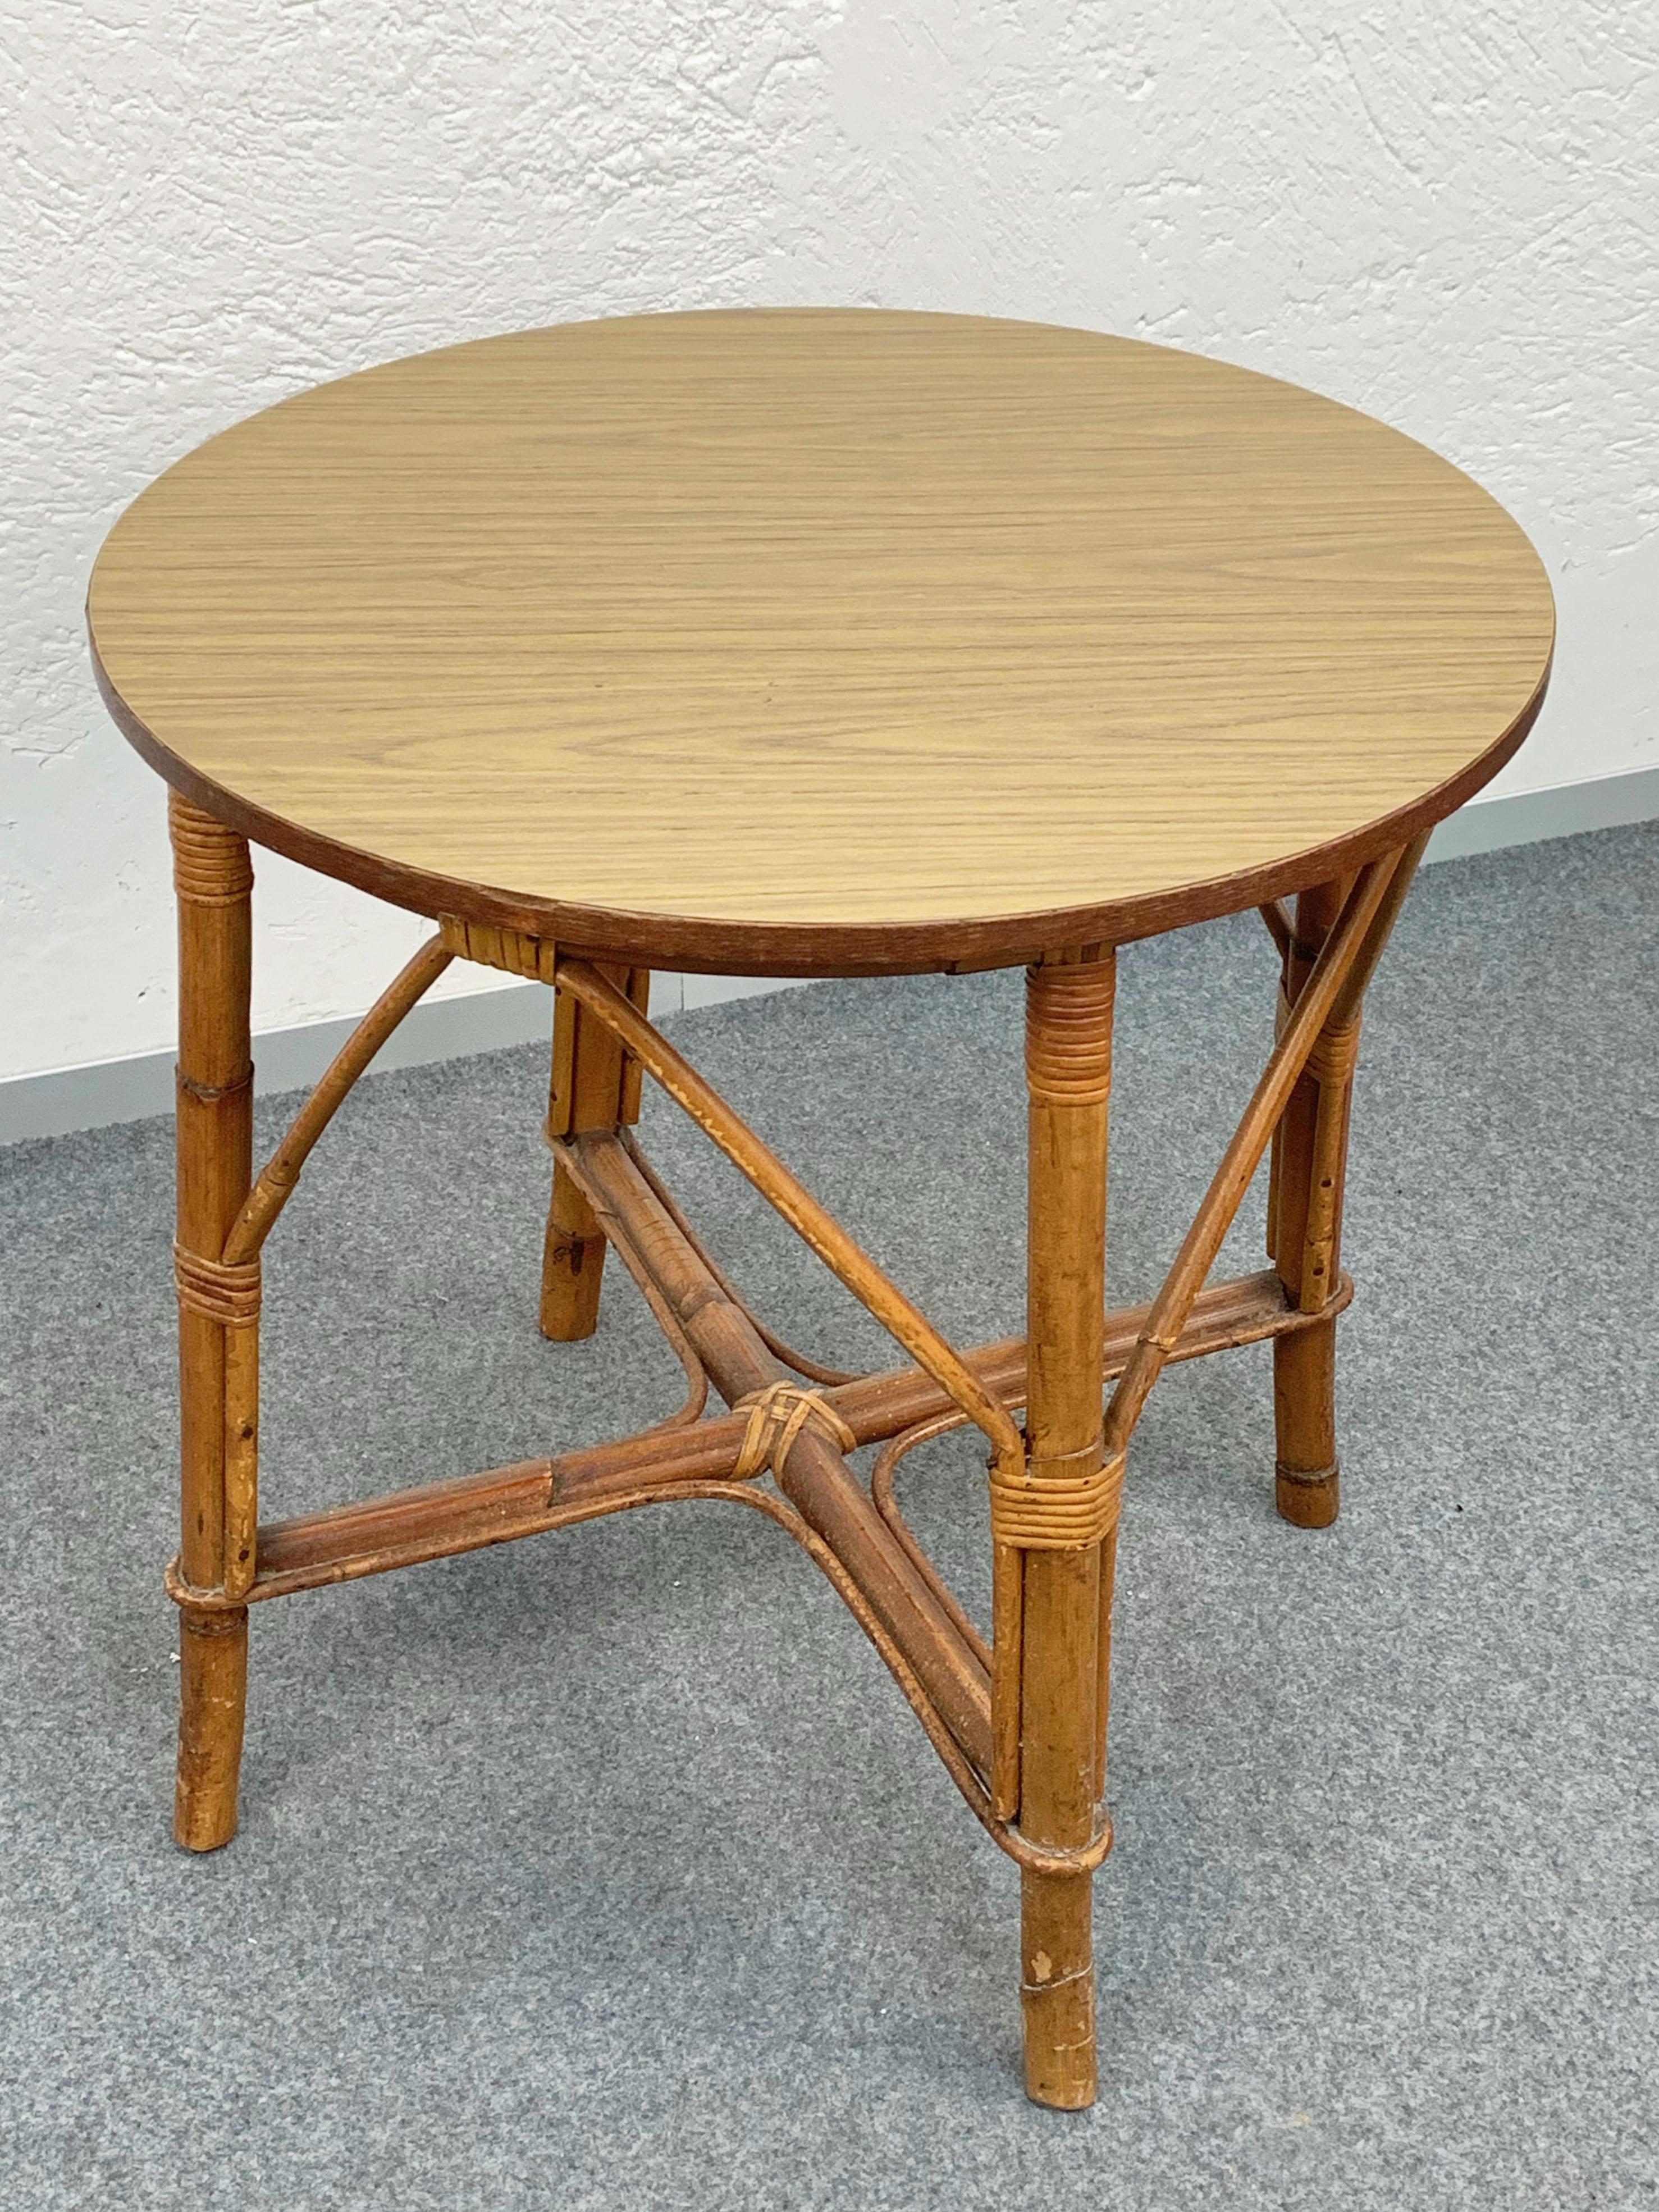 Round Midcentury Bamboo Rattan Italian Coffee Table with Laminated Top, 1960s For Sale 1